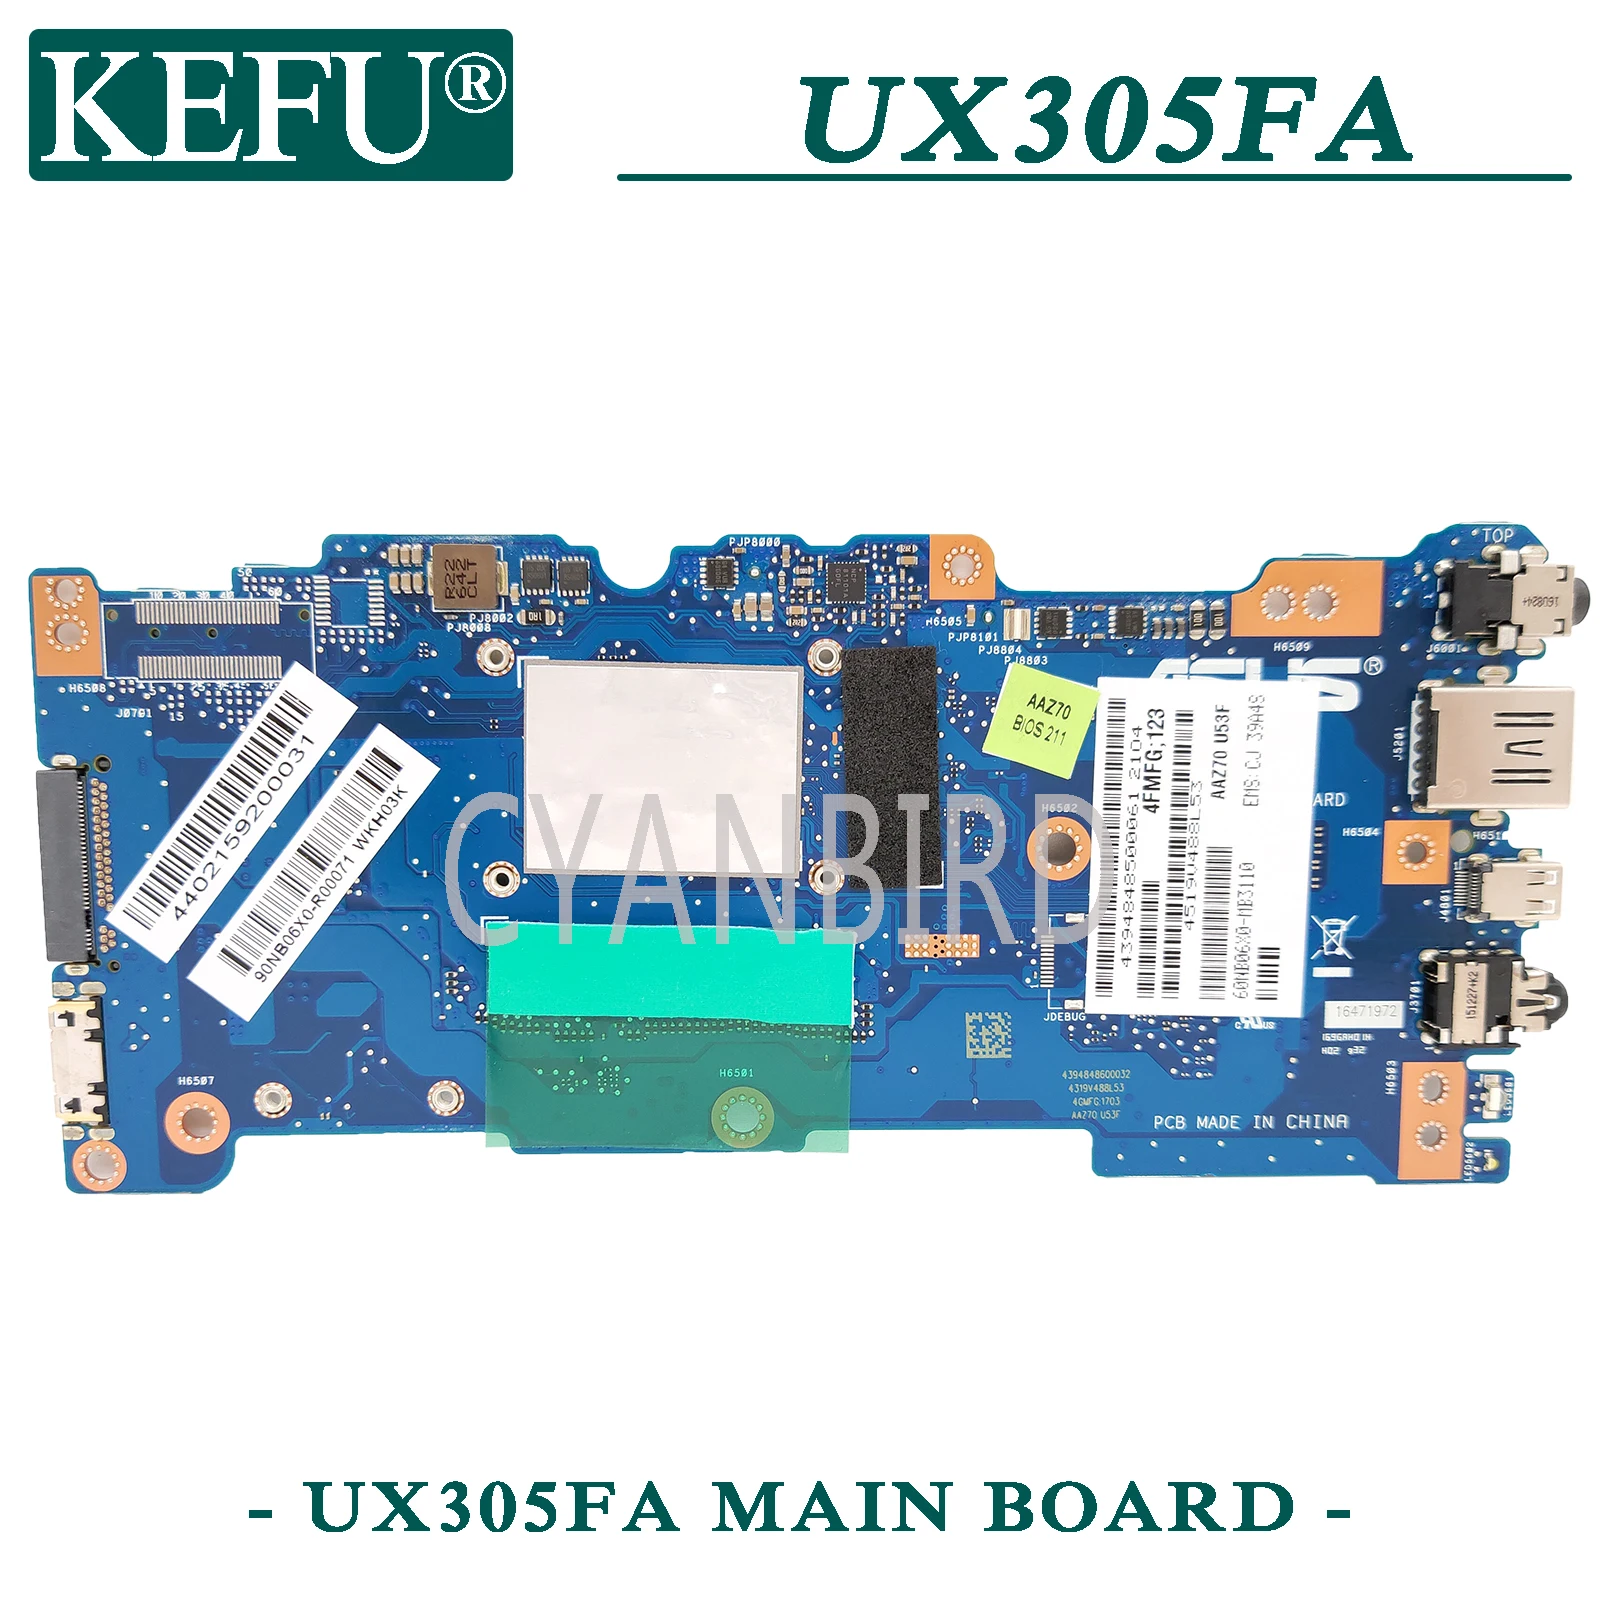 kefu ux305fa original mainboard for asus zenbook ux305fa ux305f with 8gb ram m 5y71 cpu laptop motherboard free global shipping